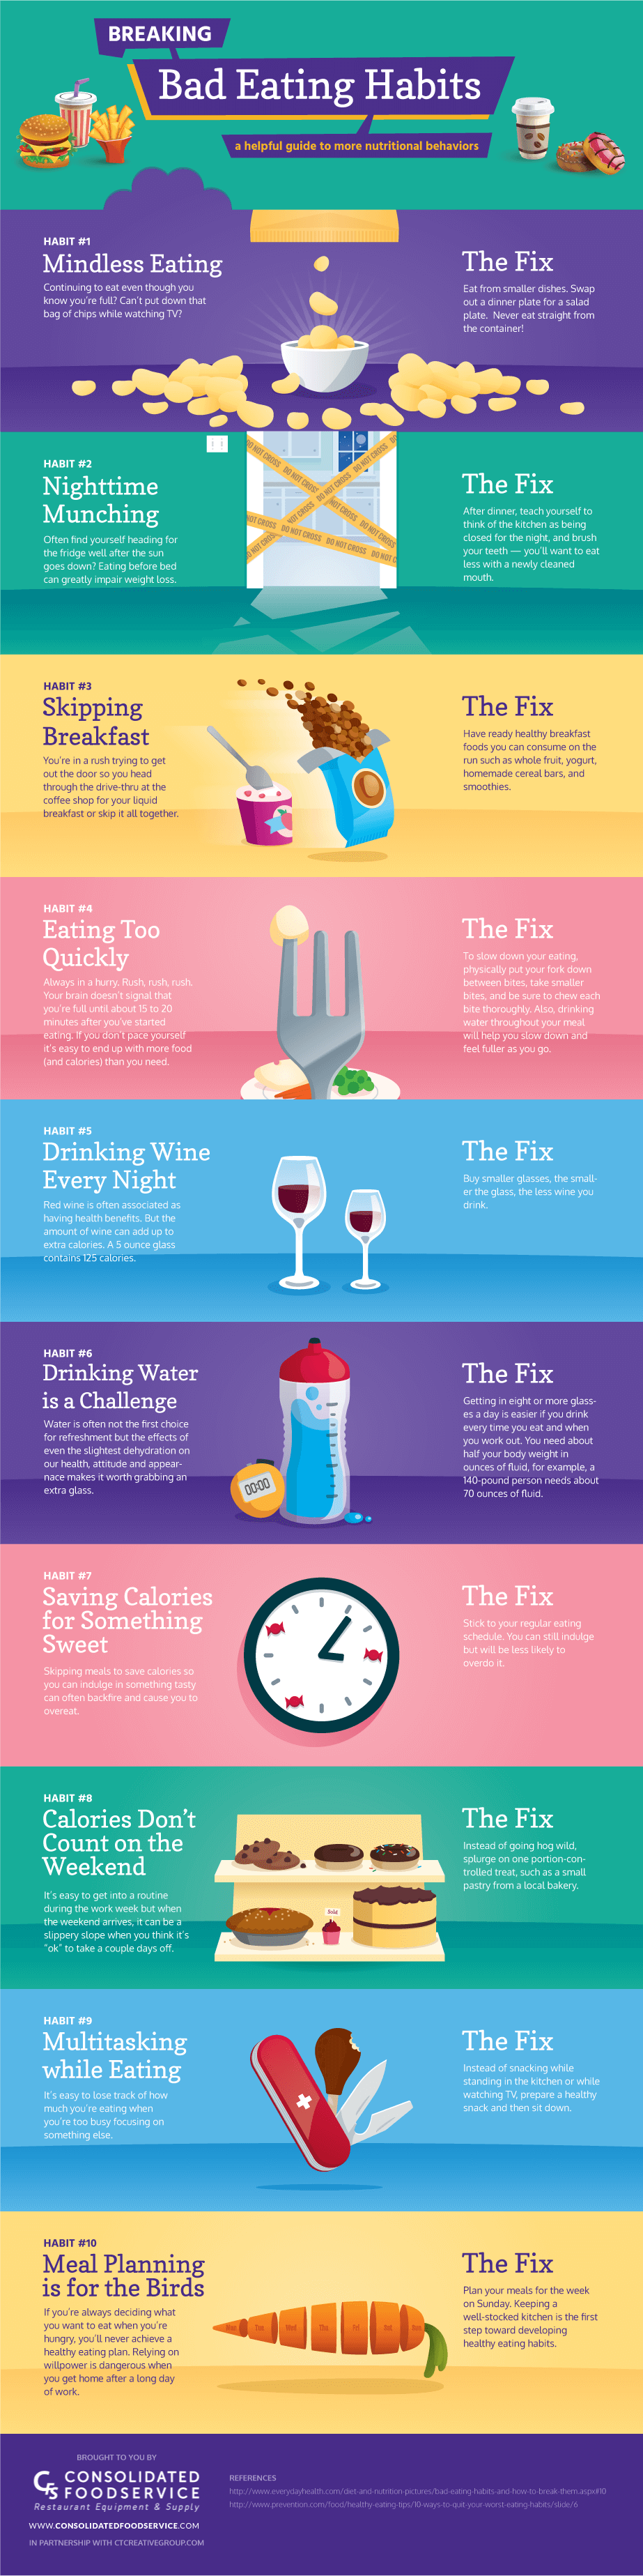 Breaking Bad Eating Habits Infographic